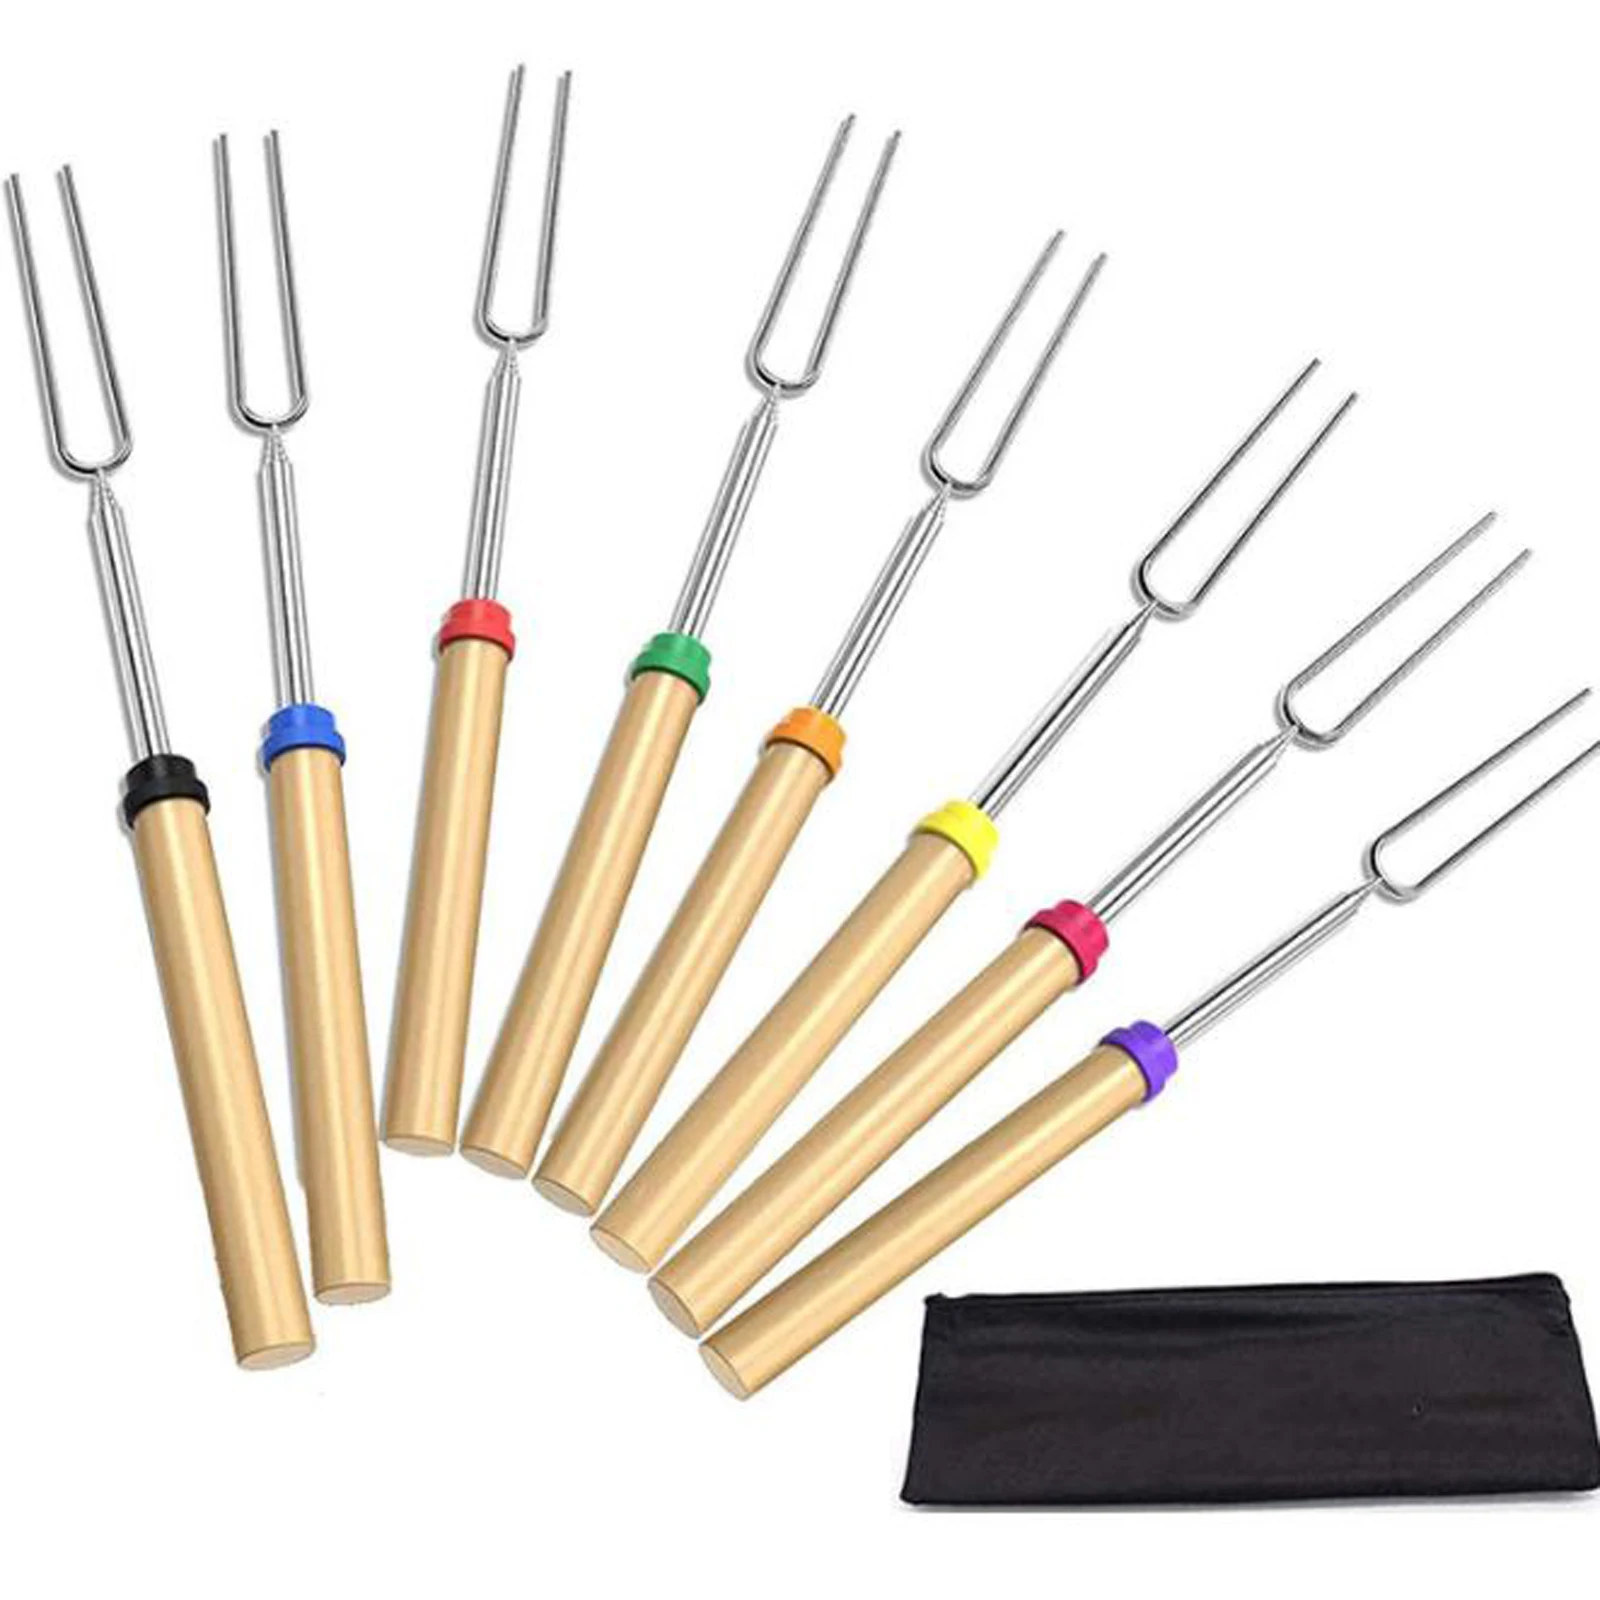 BBQ Telescoping Barbecue Forks Marshmallow Roasting Sticks Skewers 